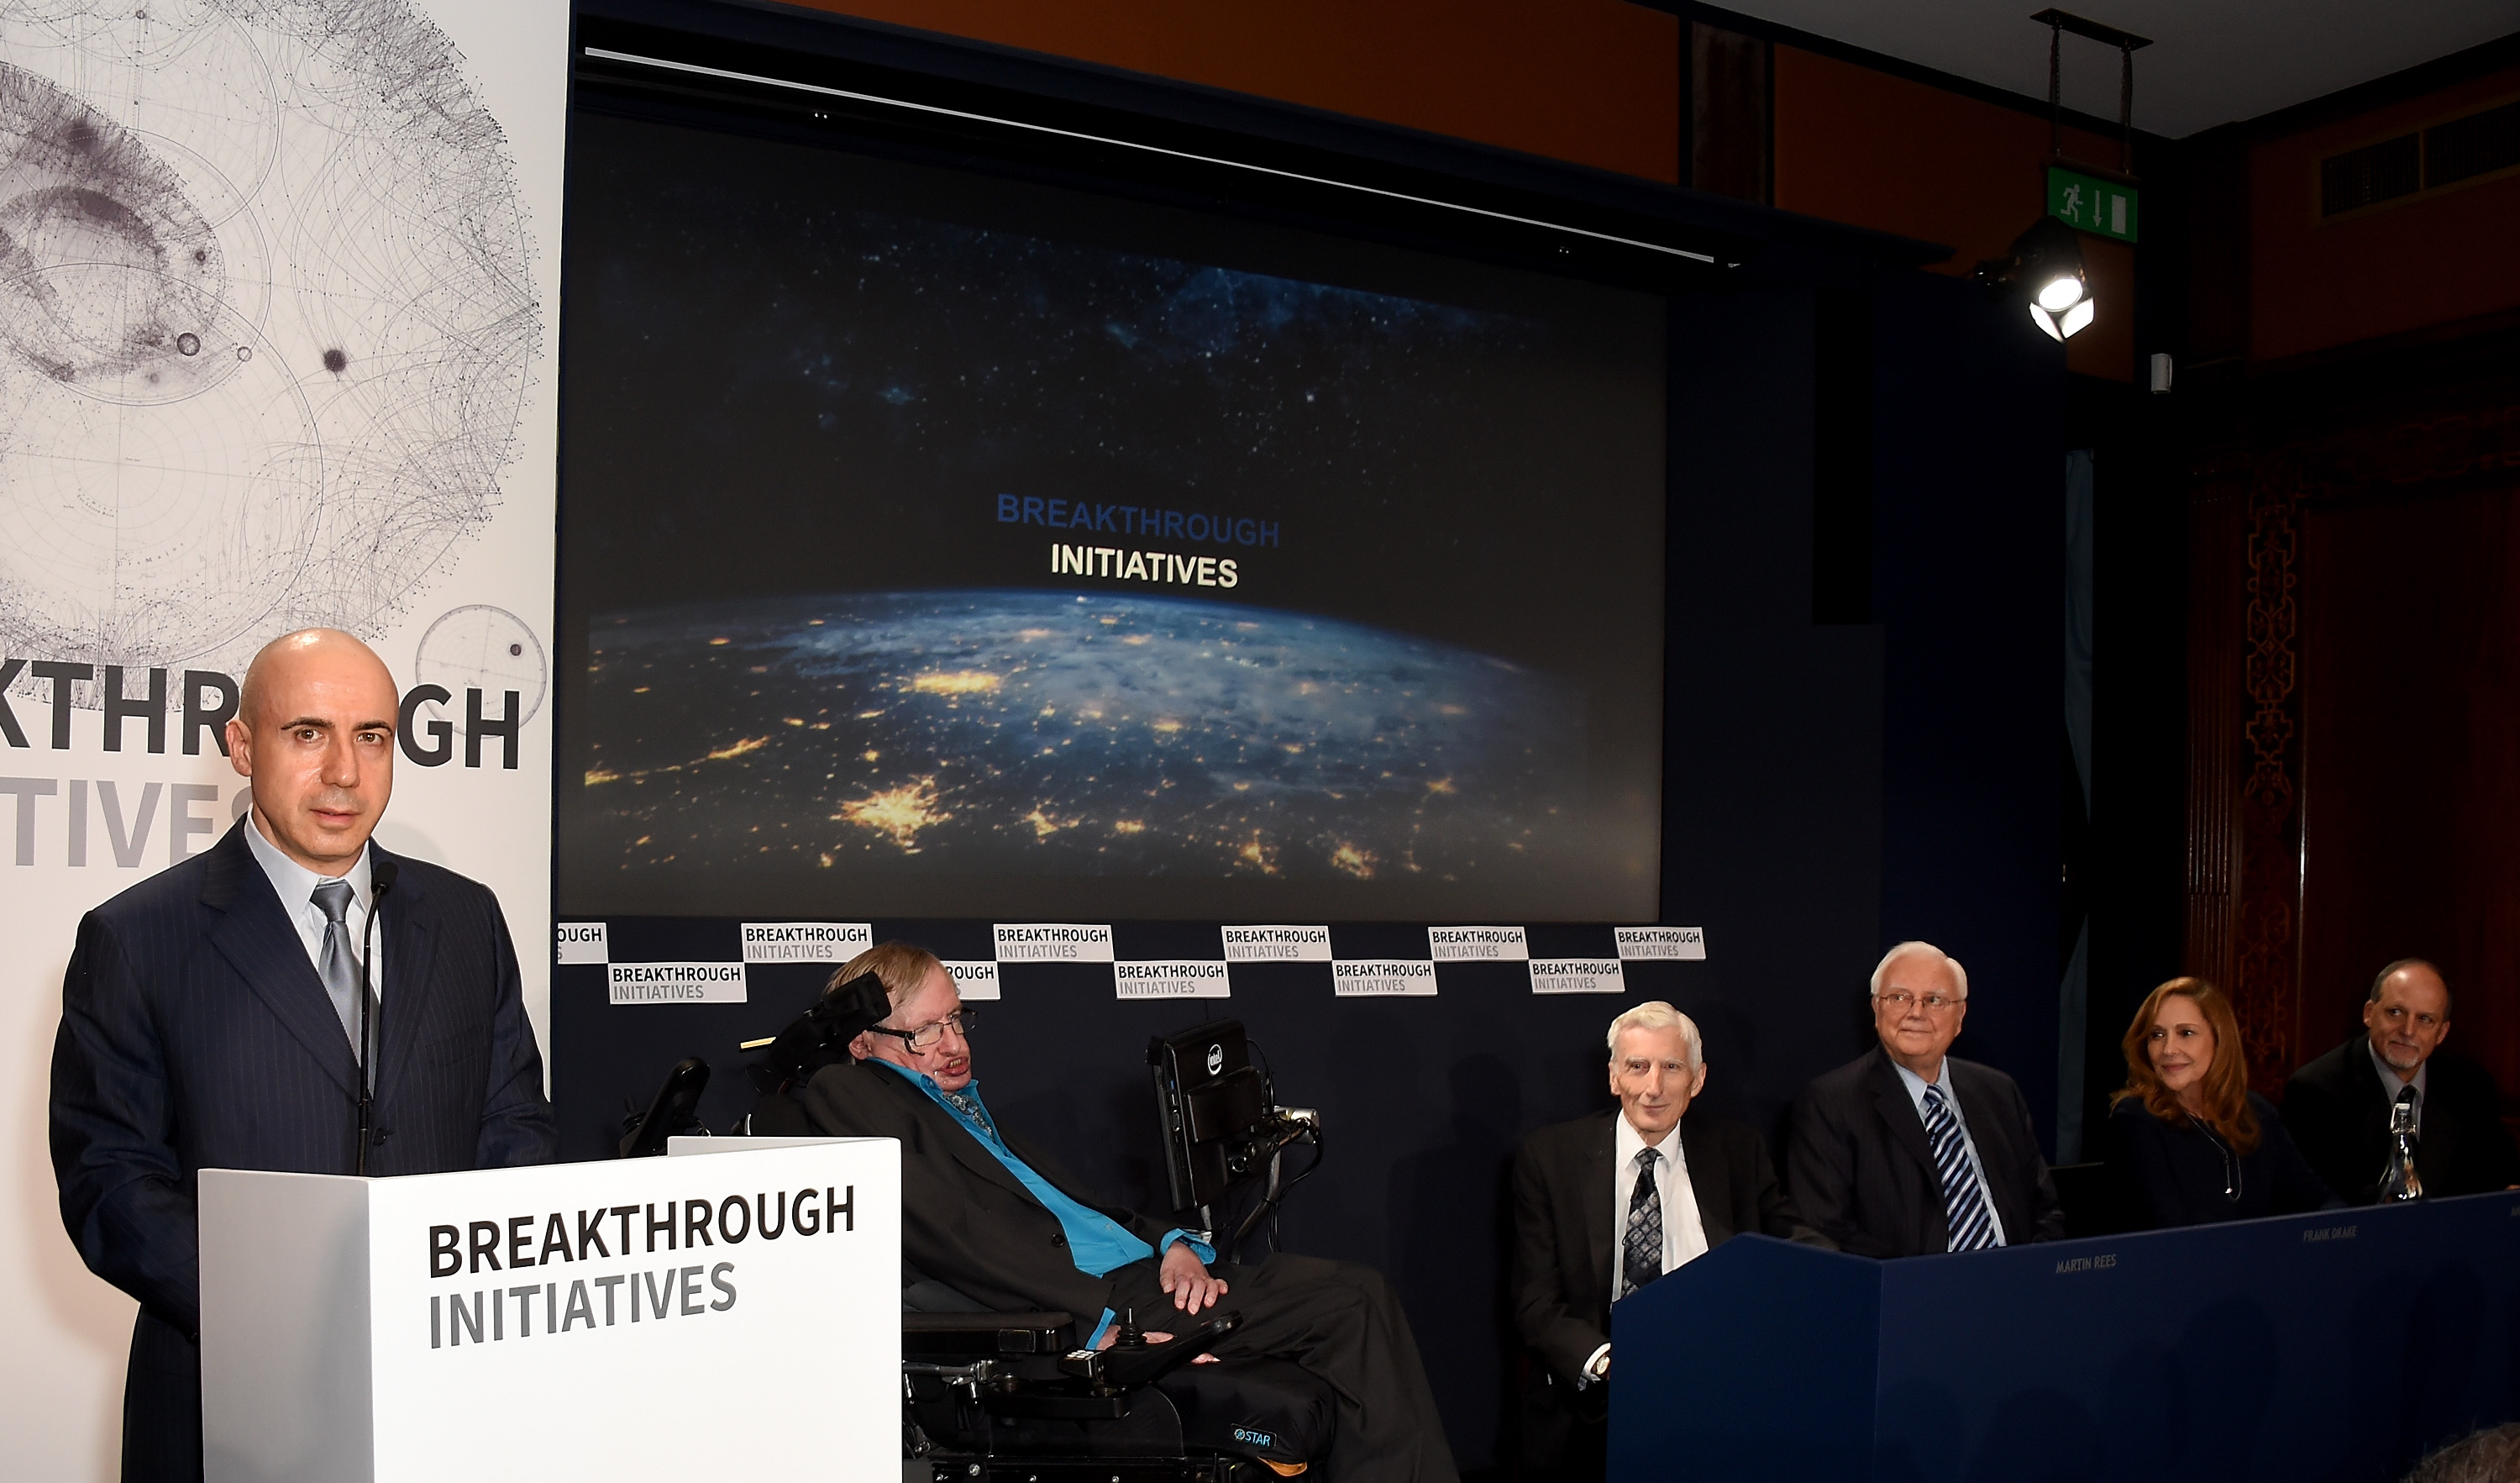 DST Global Founder Yuri Milner, Theoretical Physicist Stephen Hawking, Cosmologist and astrophysicist Lord Martin Rees, Chairman Emeritus, SETI Institute Frank Drake, Creative Director of the Interstellar Message, NASA Voyager Ann Druyan and Professor of Astronomy, University of California Geoff Marcy attend a press conference on the Breakthrough Life in the Universe Initiatives. (Stuart C. Wilson&mdash;Getty Images for Breakthrough Initiatives)